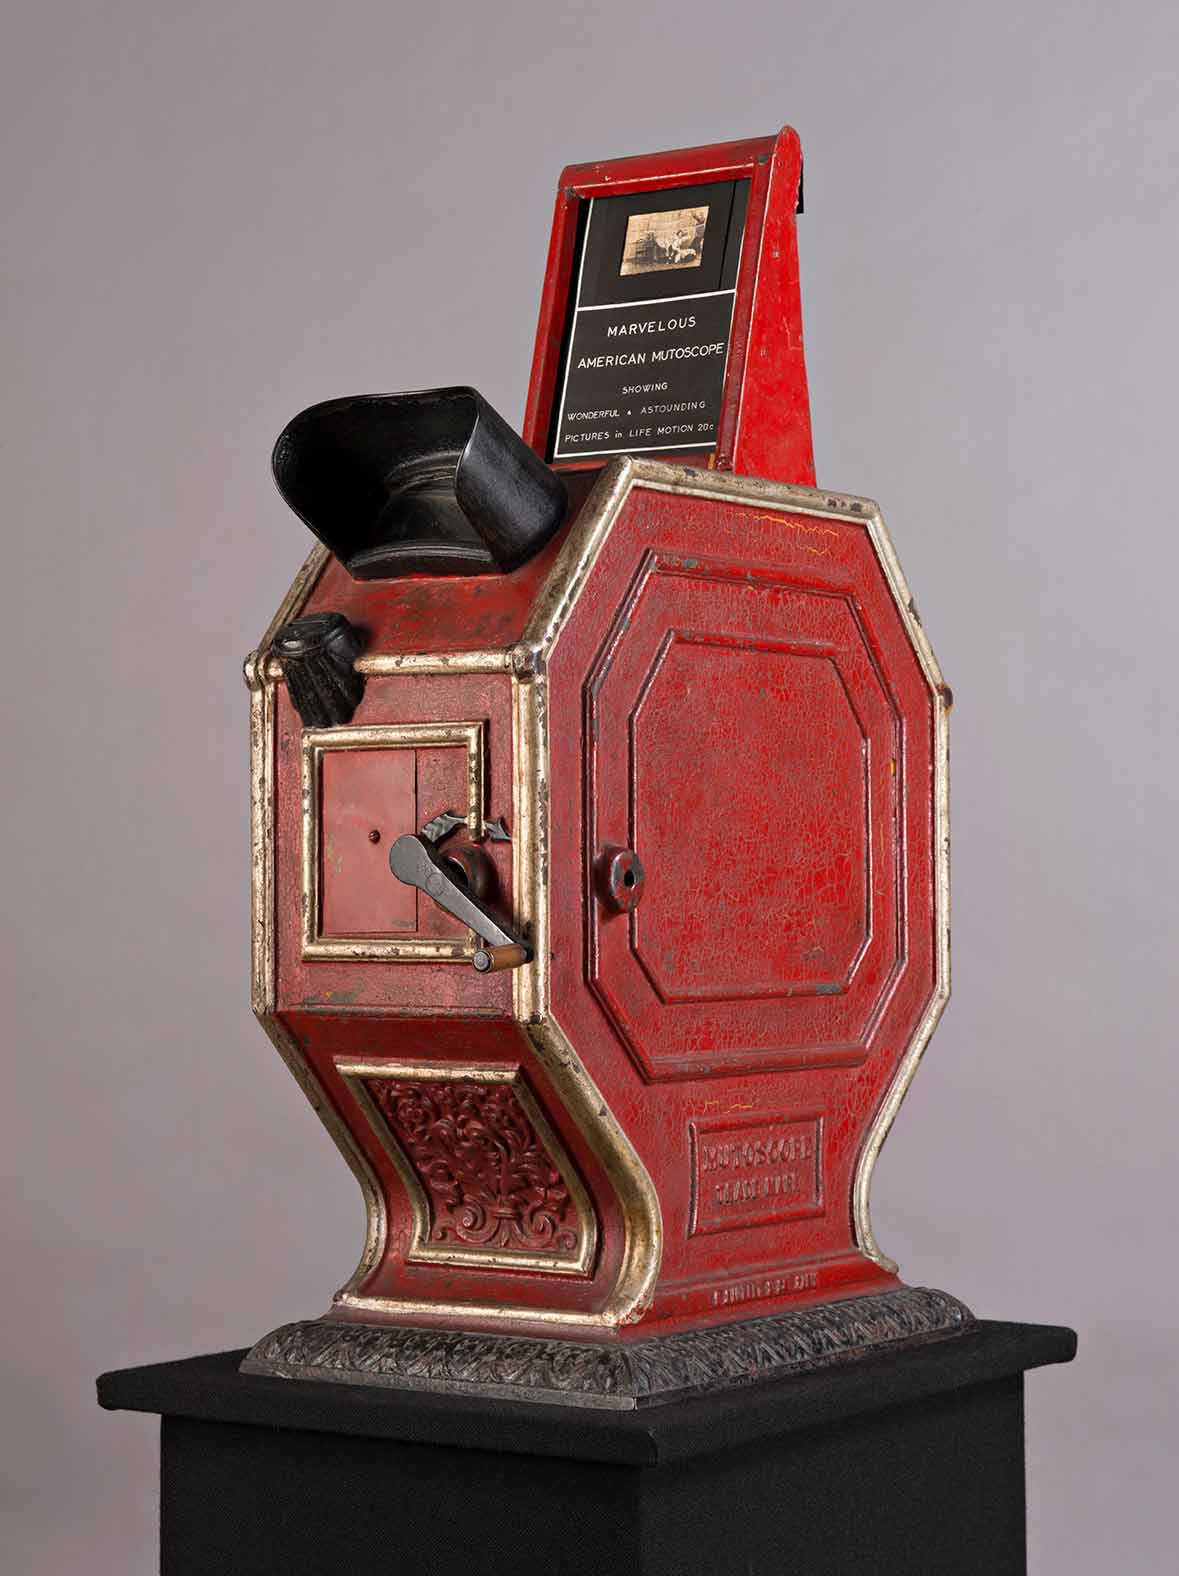 Visionneuse. Mutoscope. 1898